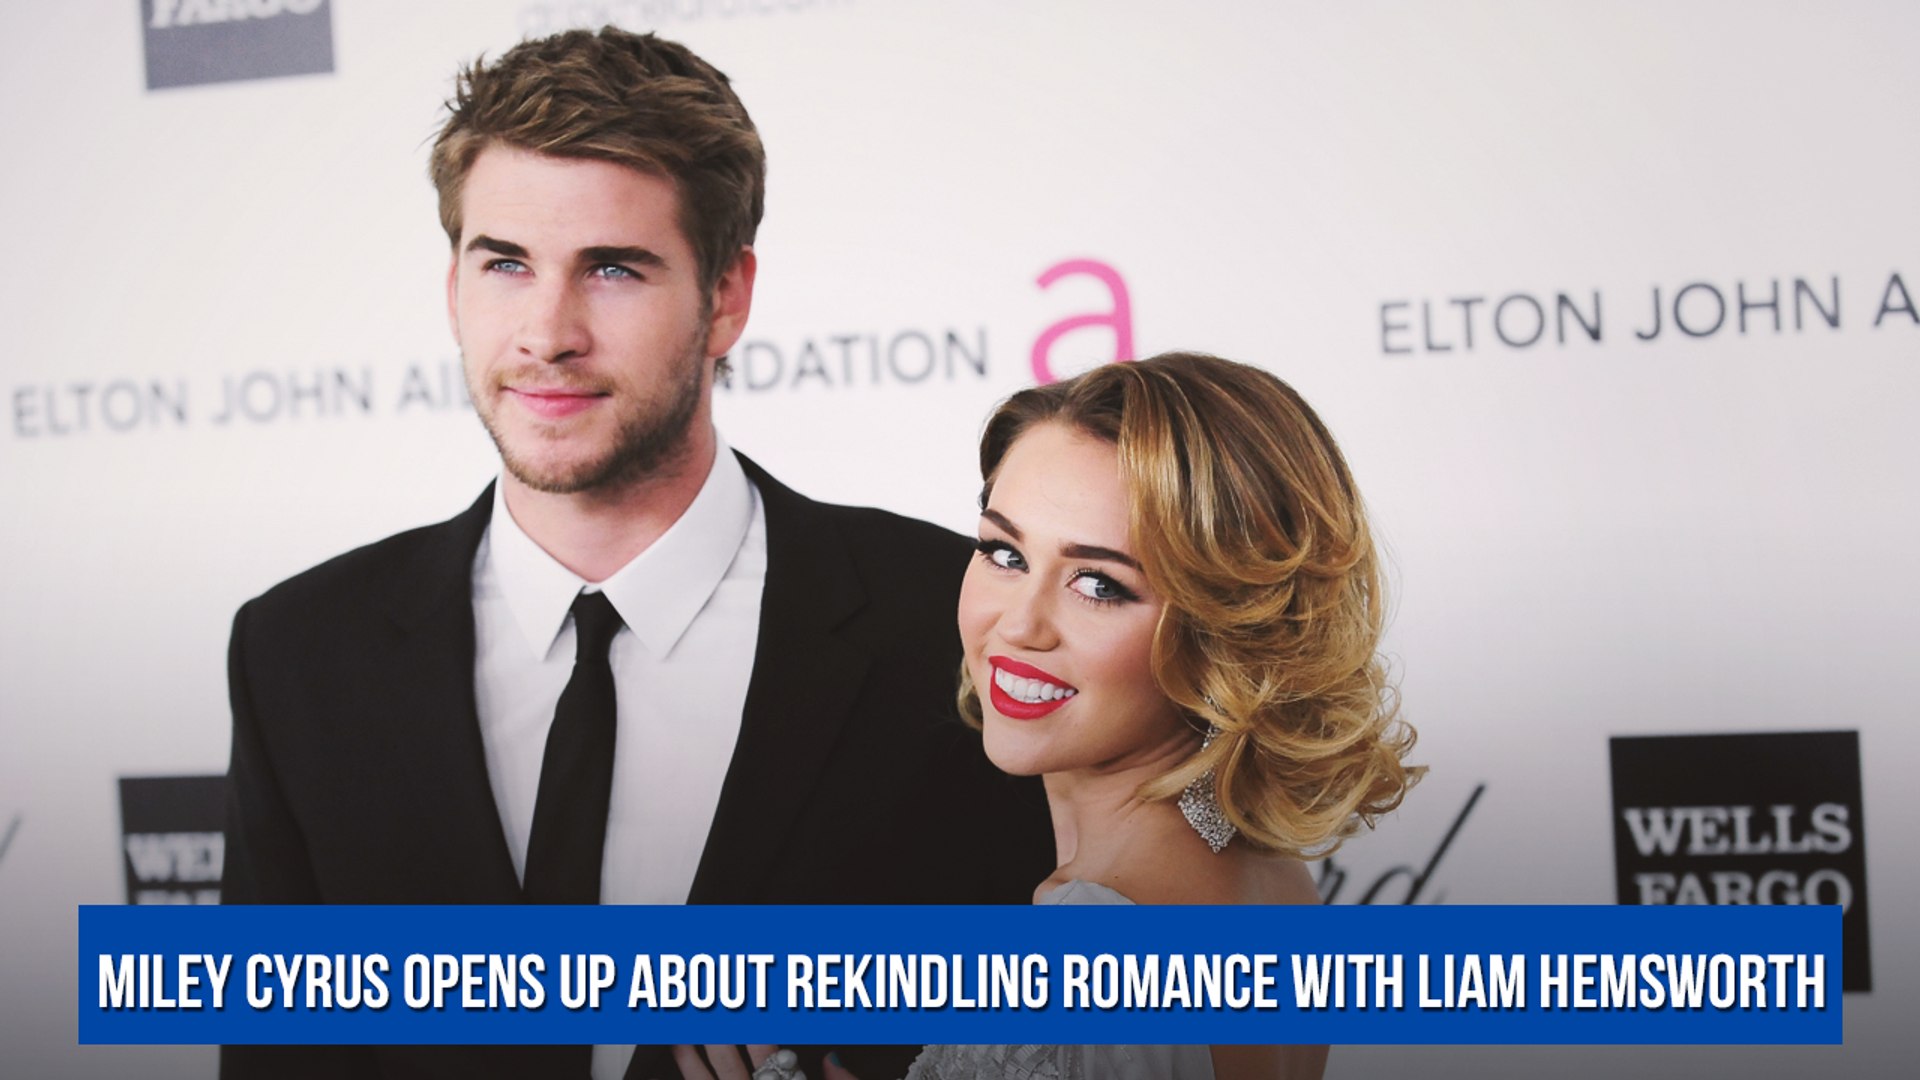 Miley Cyrus opens up about rekindling romance with fiance Liam Hemsworth